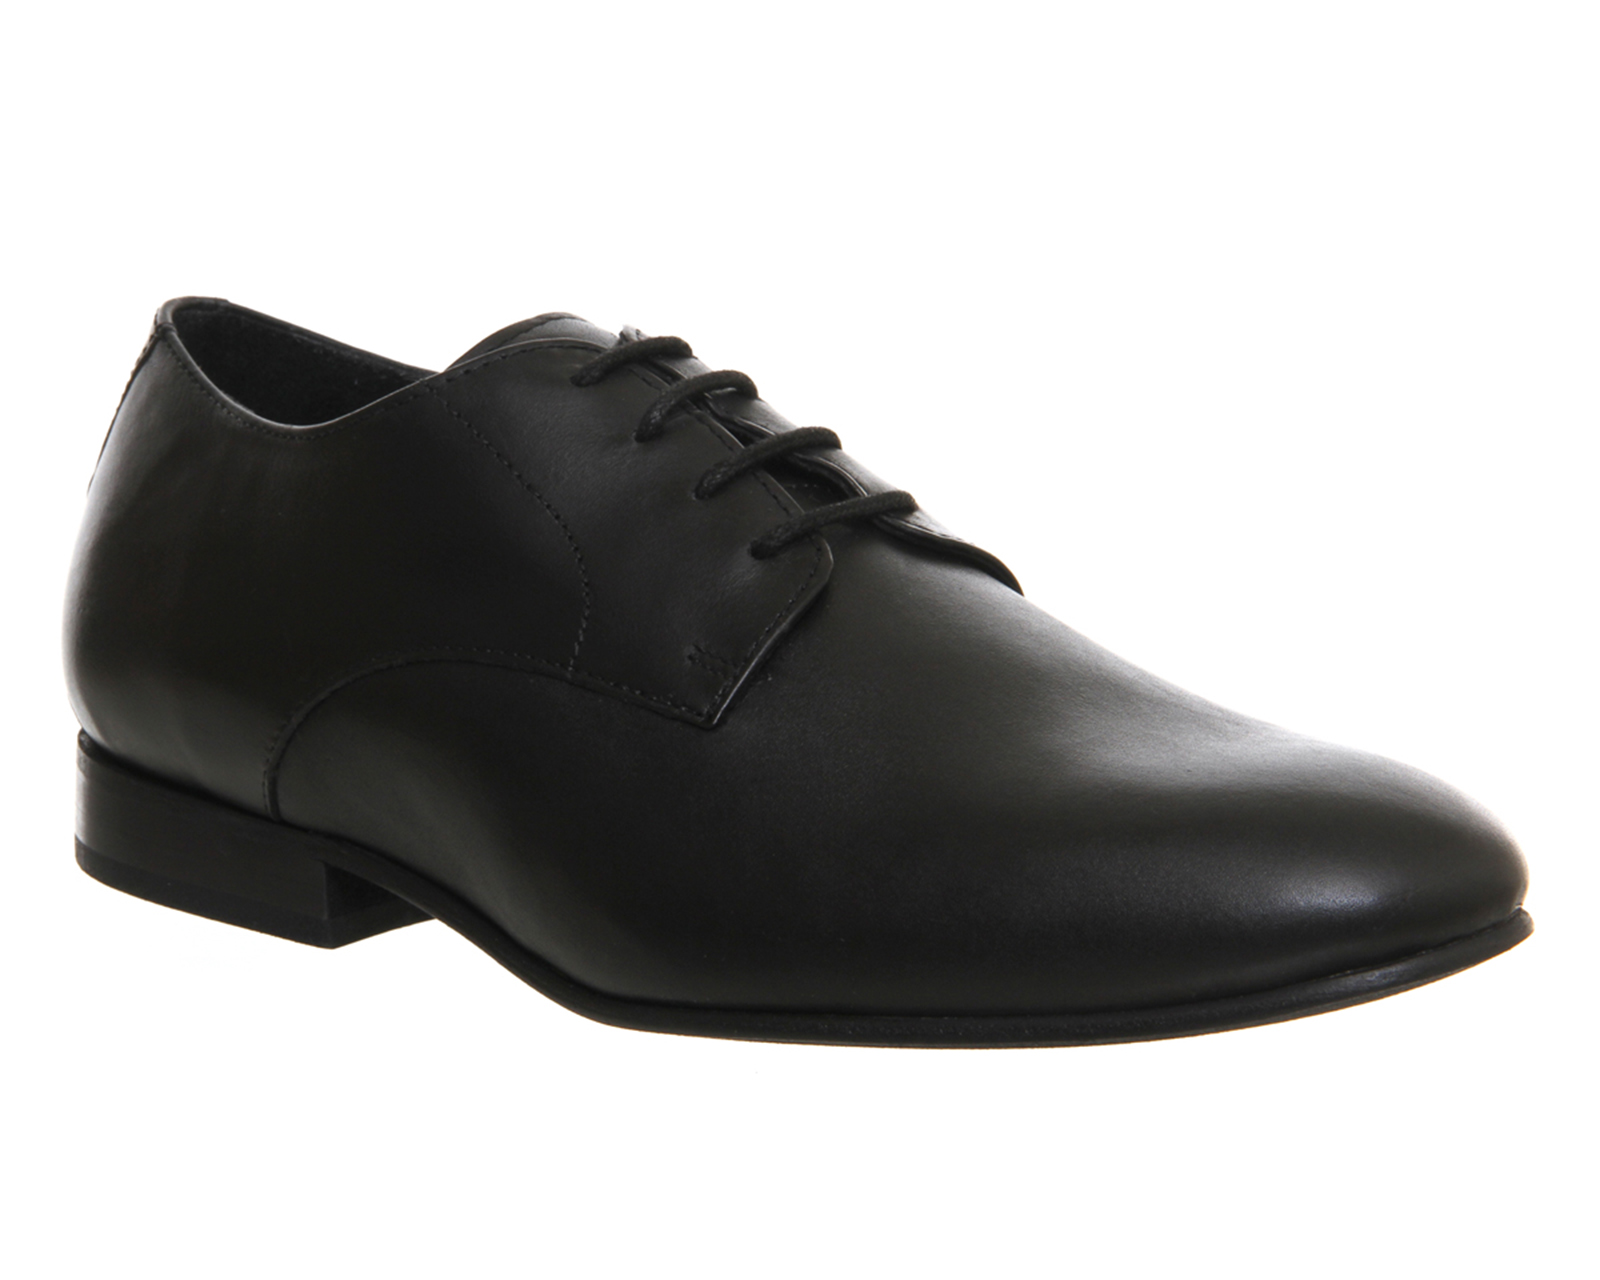 OFFICEBrody Gibson Lace UpBlack Leather